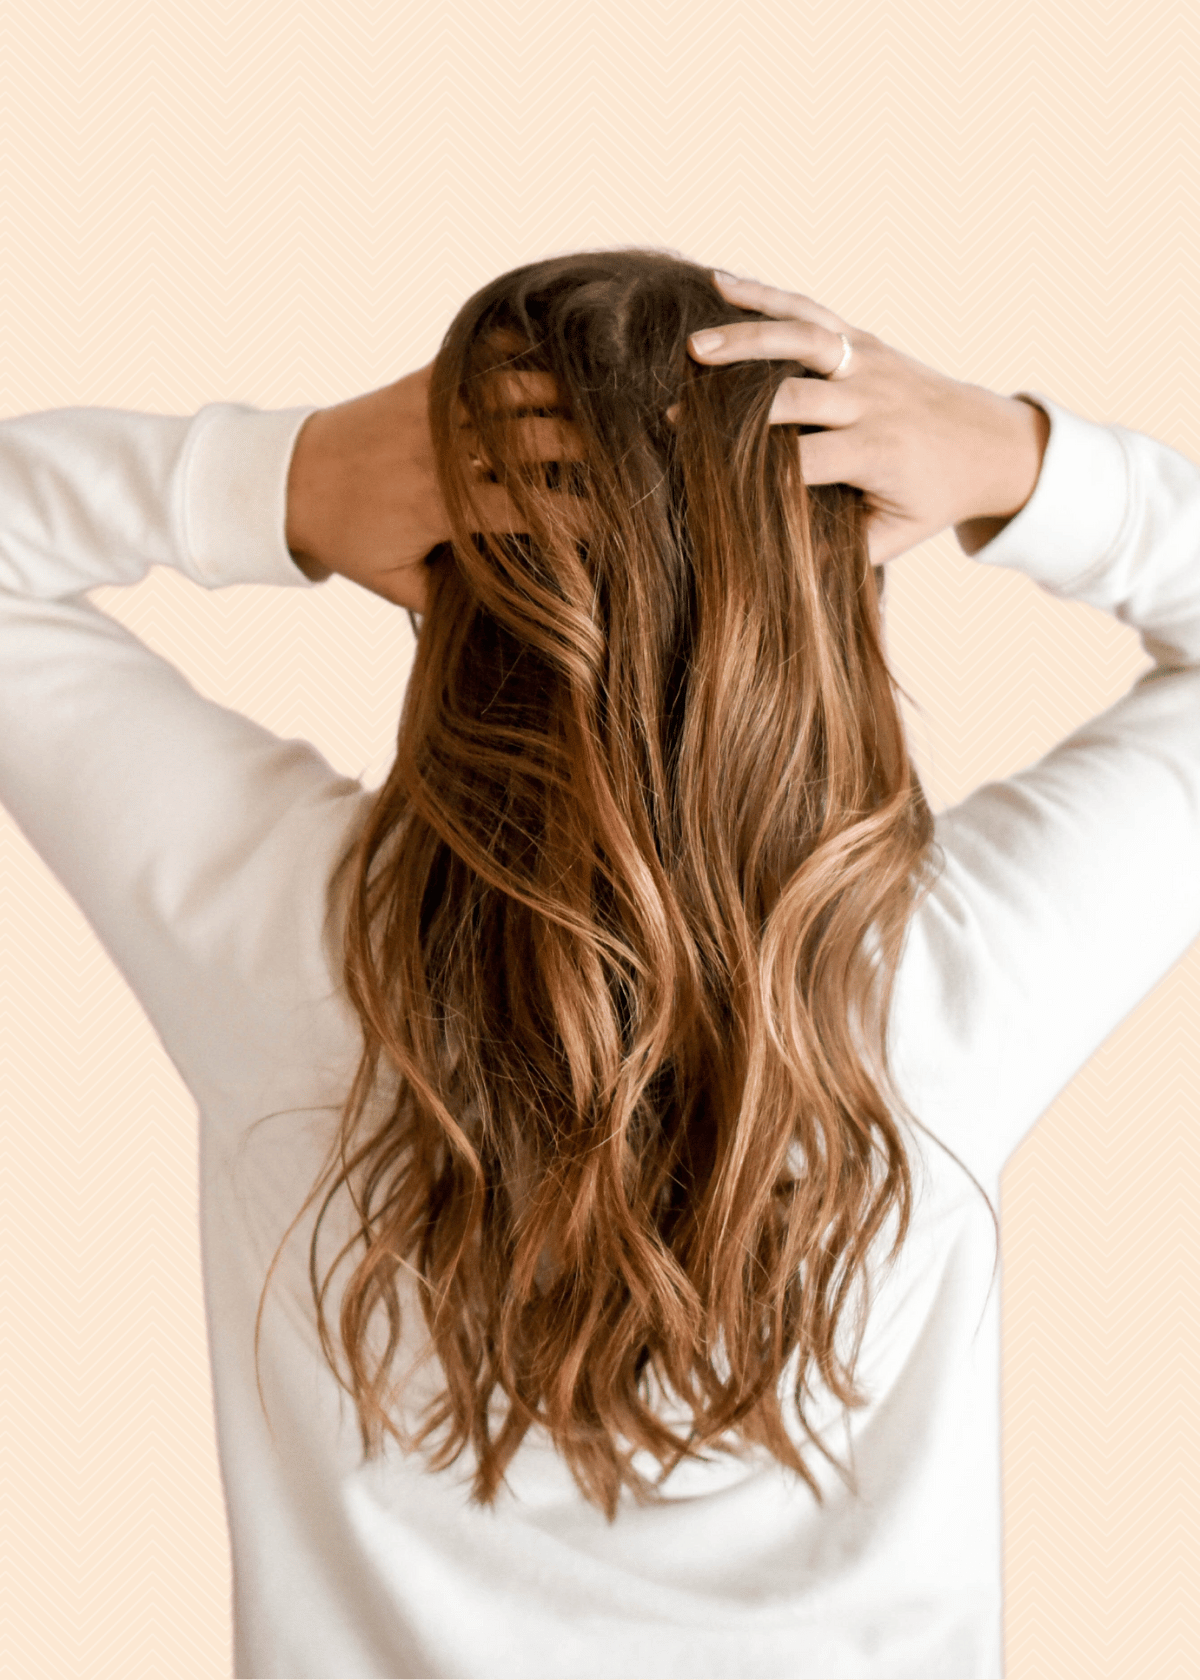 Kenra Clarifying Shampoo Review: Eliminate Dulling Deposits for Color-Safe Results